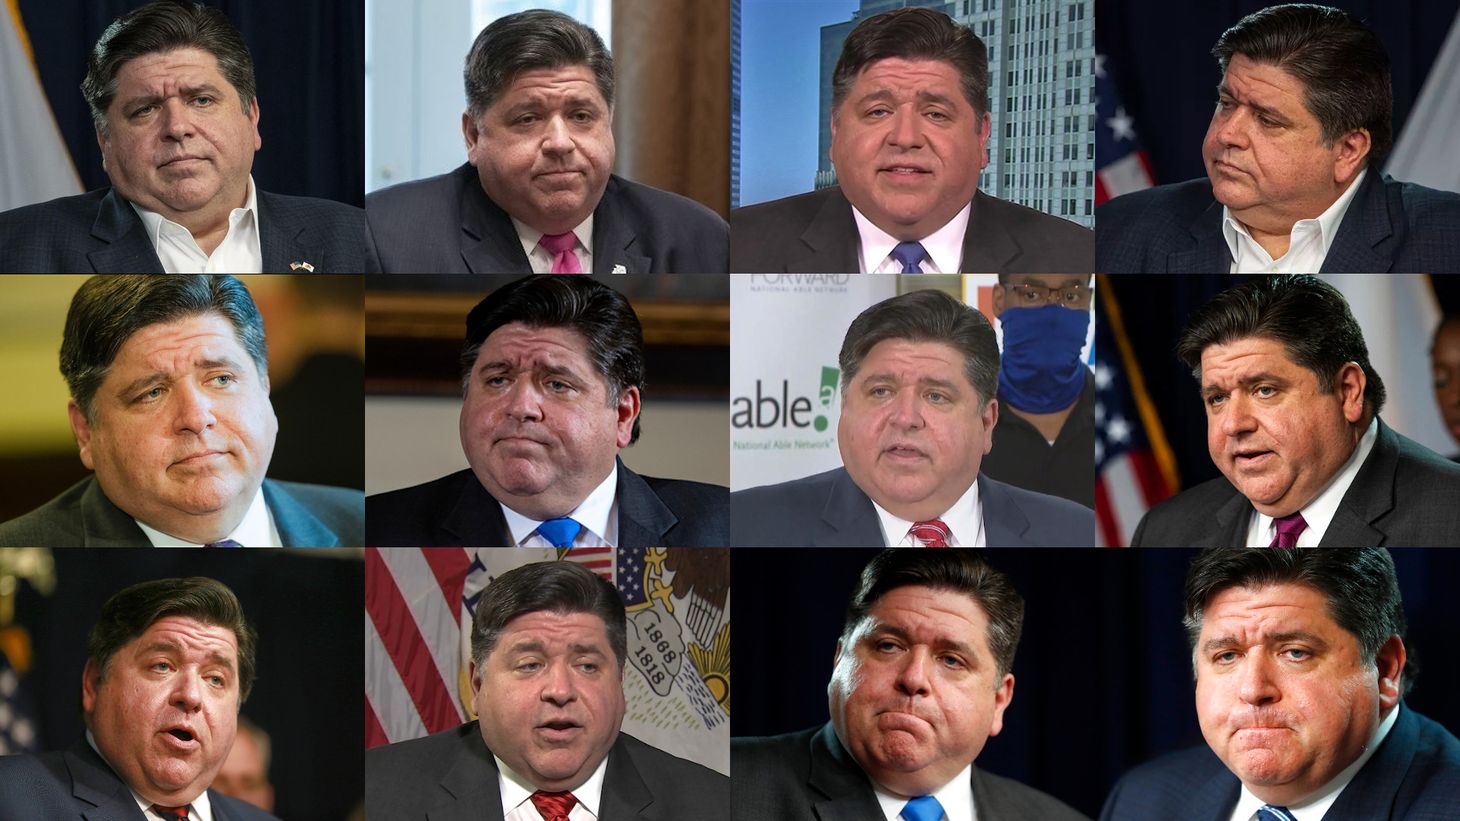 Opinion: Is J.B. Pritzker Unfit to Lead the State of Illinois?